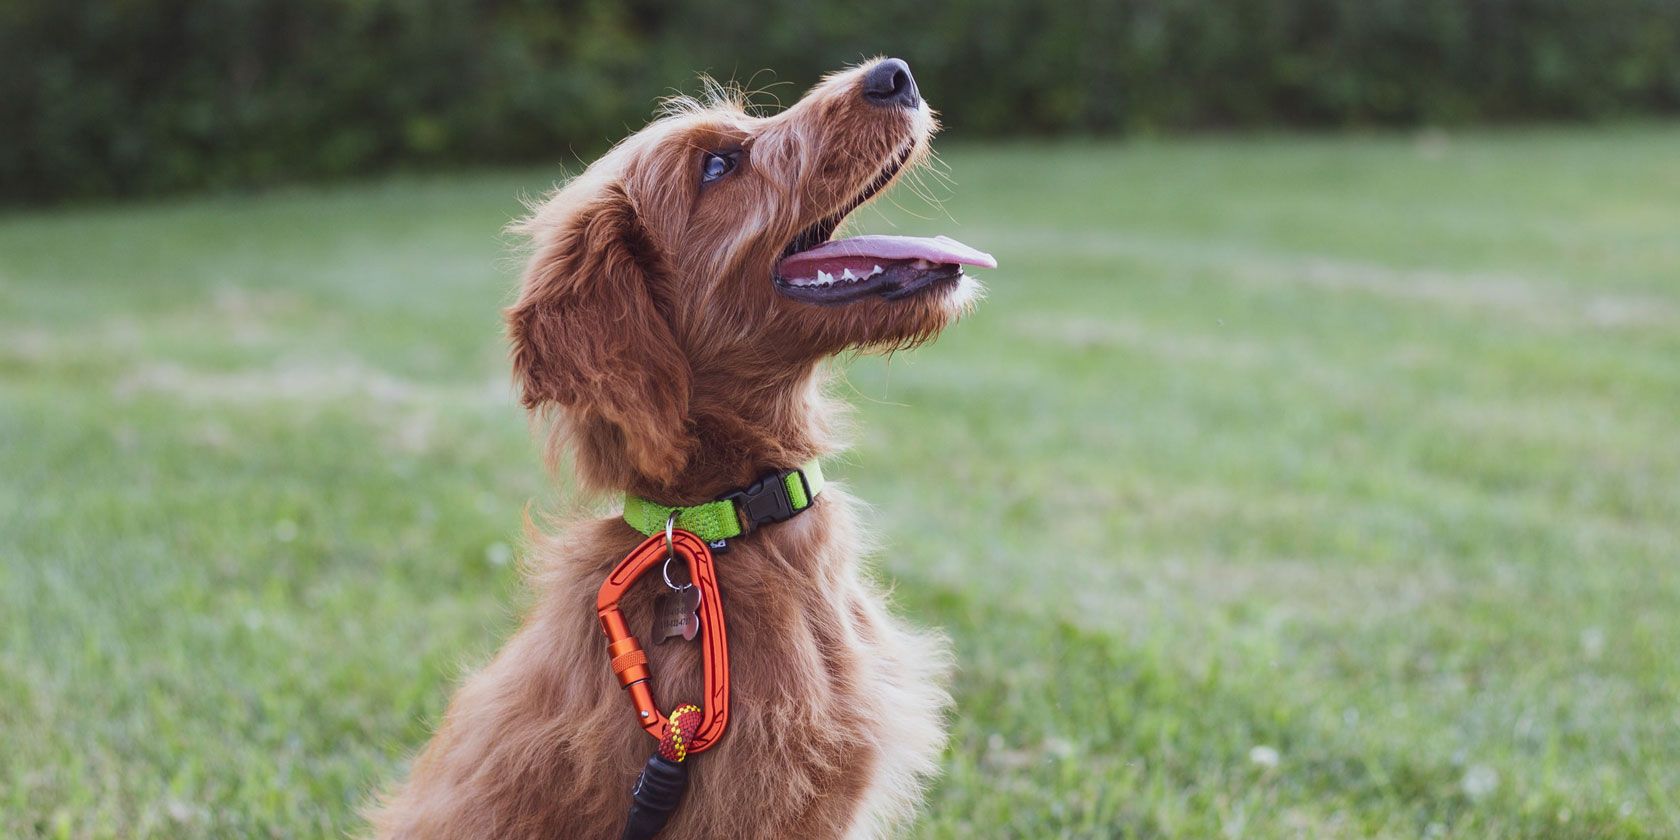 The 5 Best Dog Training Apps for Android and iPhone